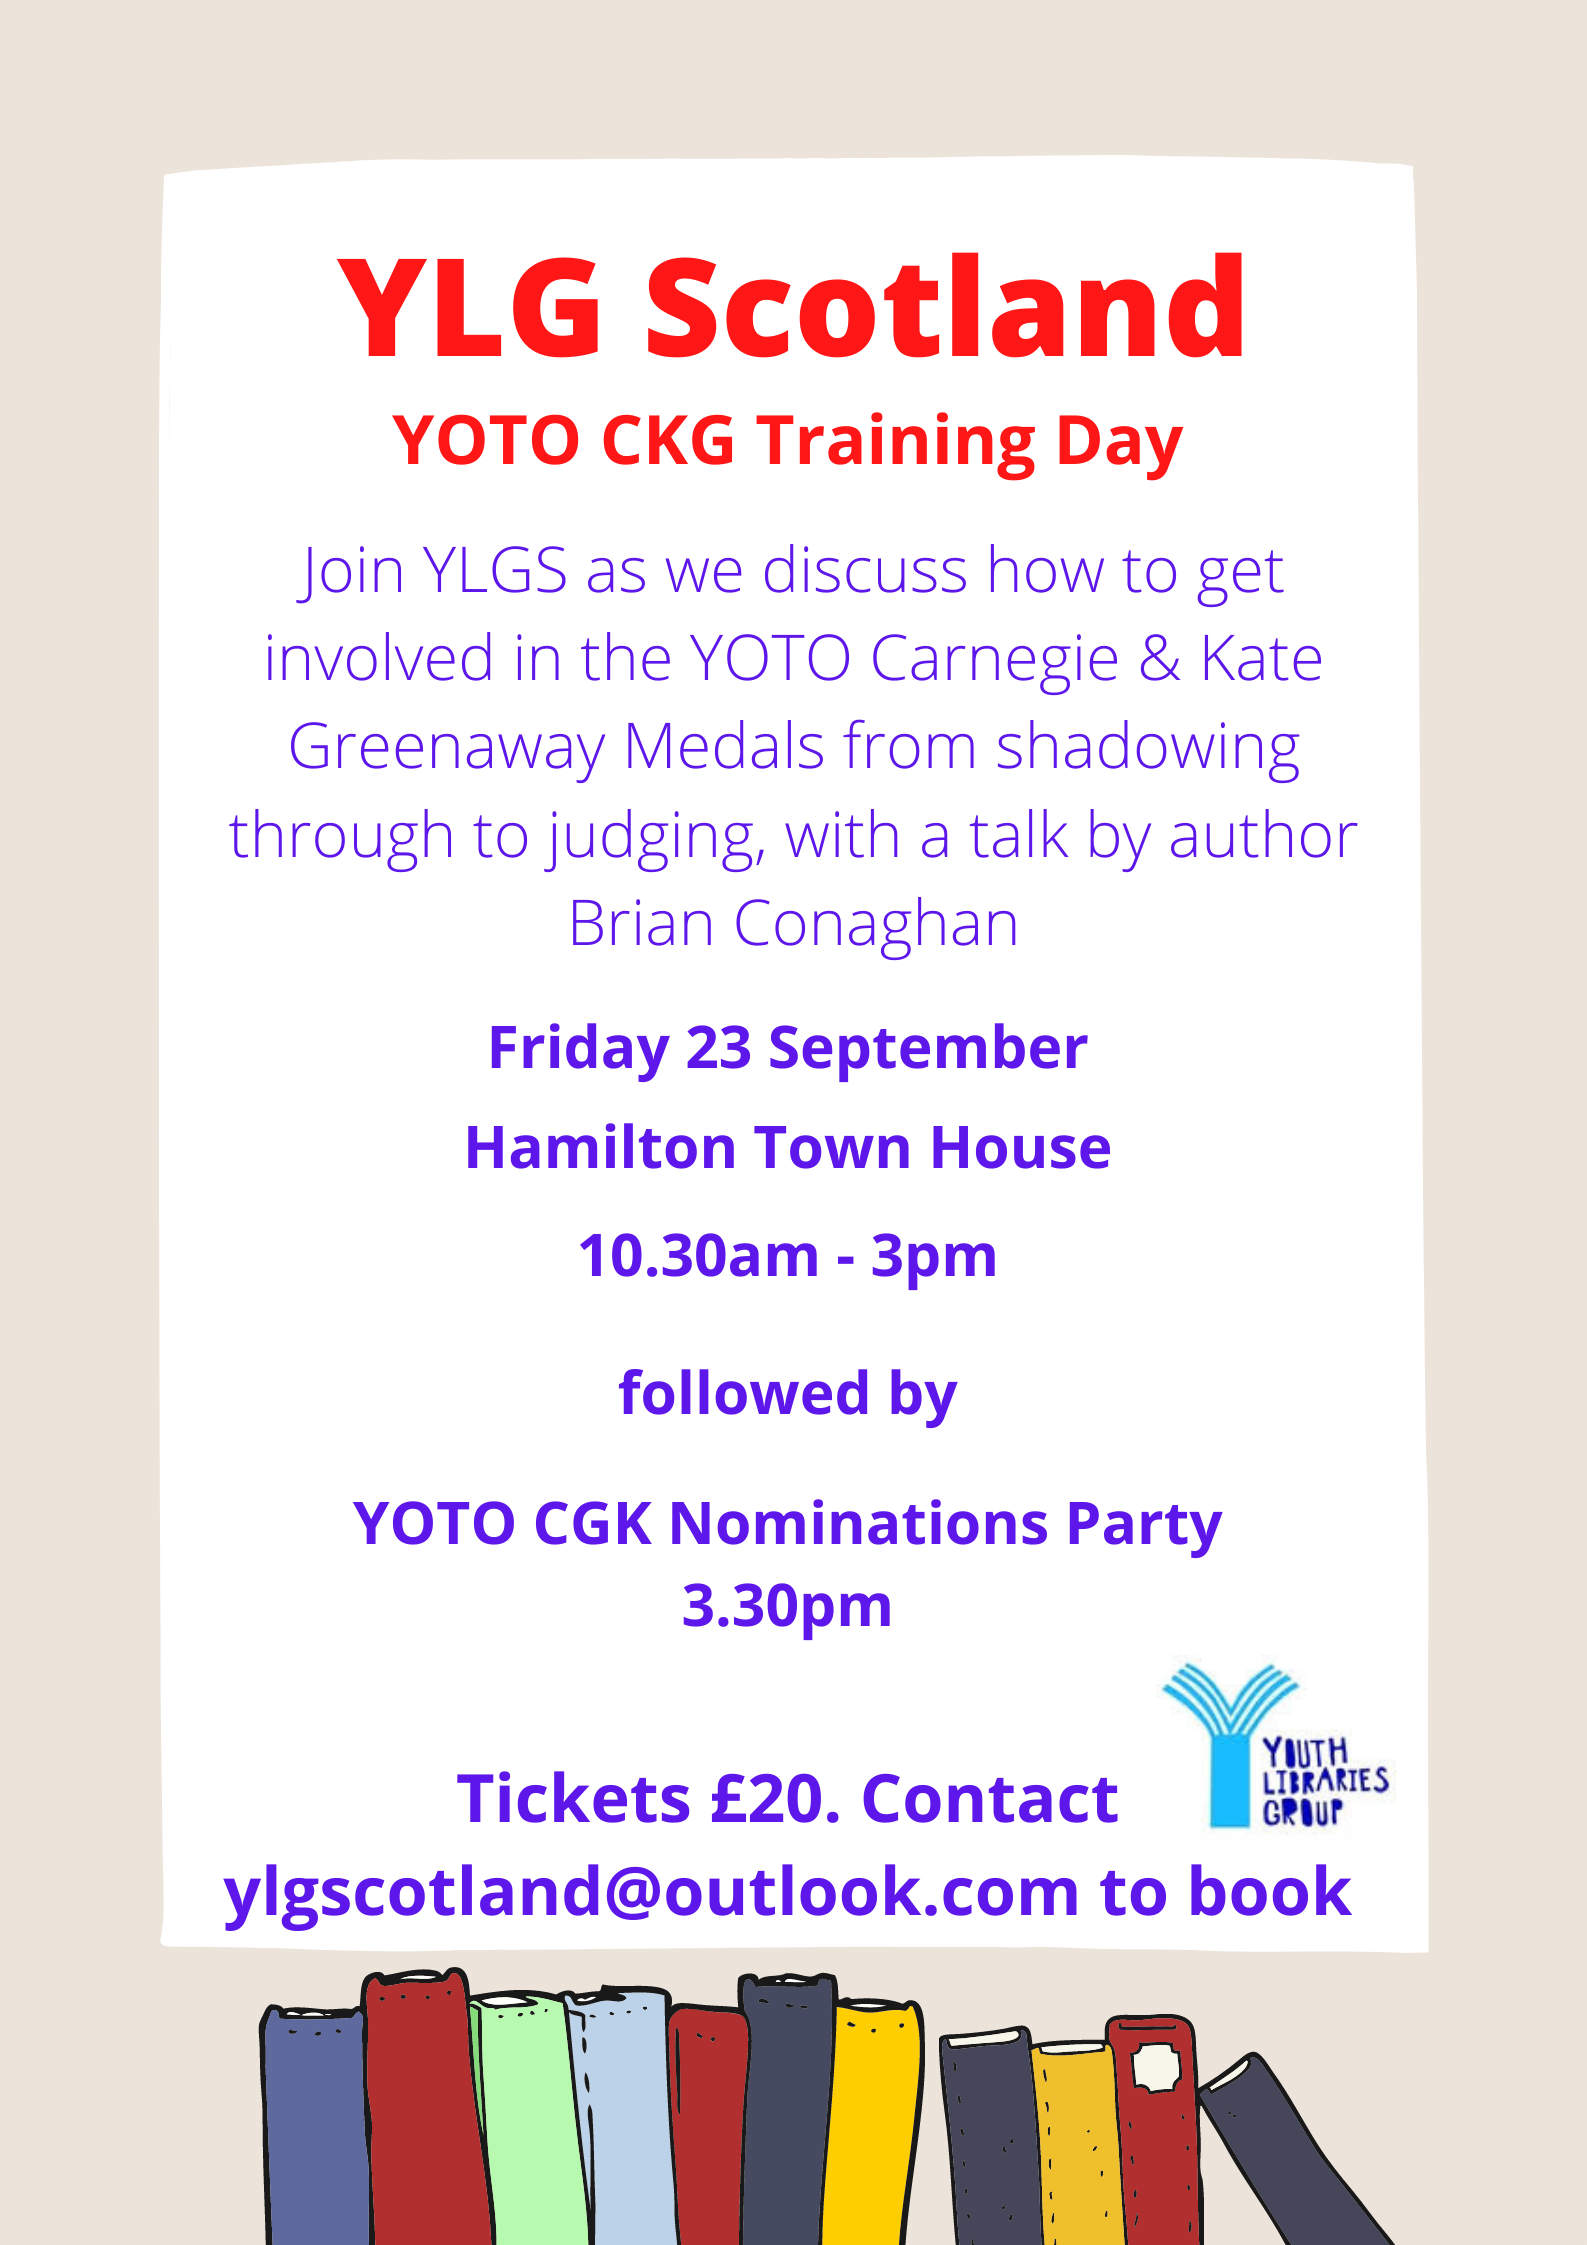 The poster for YLG Scotland's YOTO CKG Training Day at Hamilton Town House Library, 10.30am - 3pm. Tickets £20, contact ylgscotland@outlook.com to book.